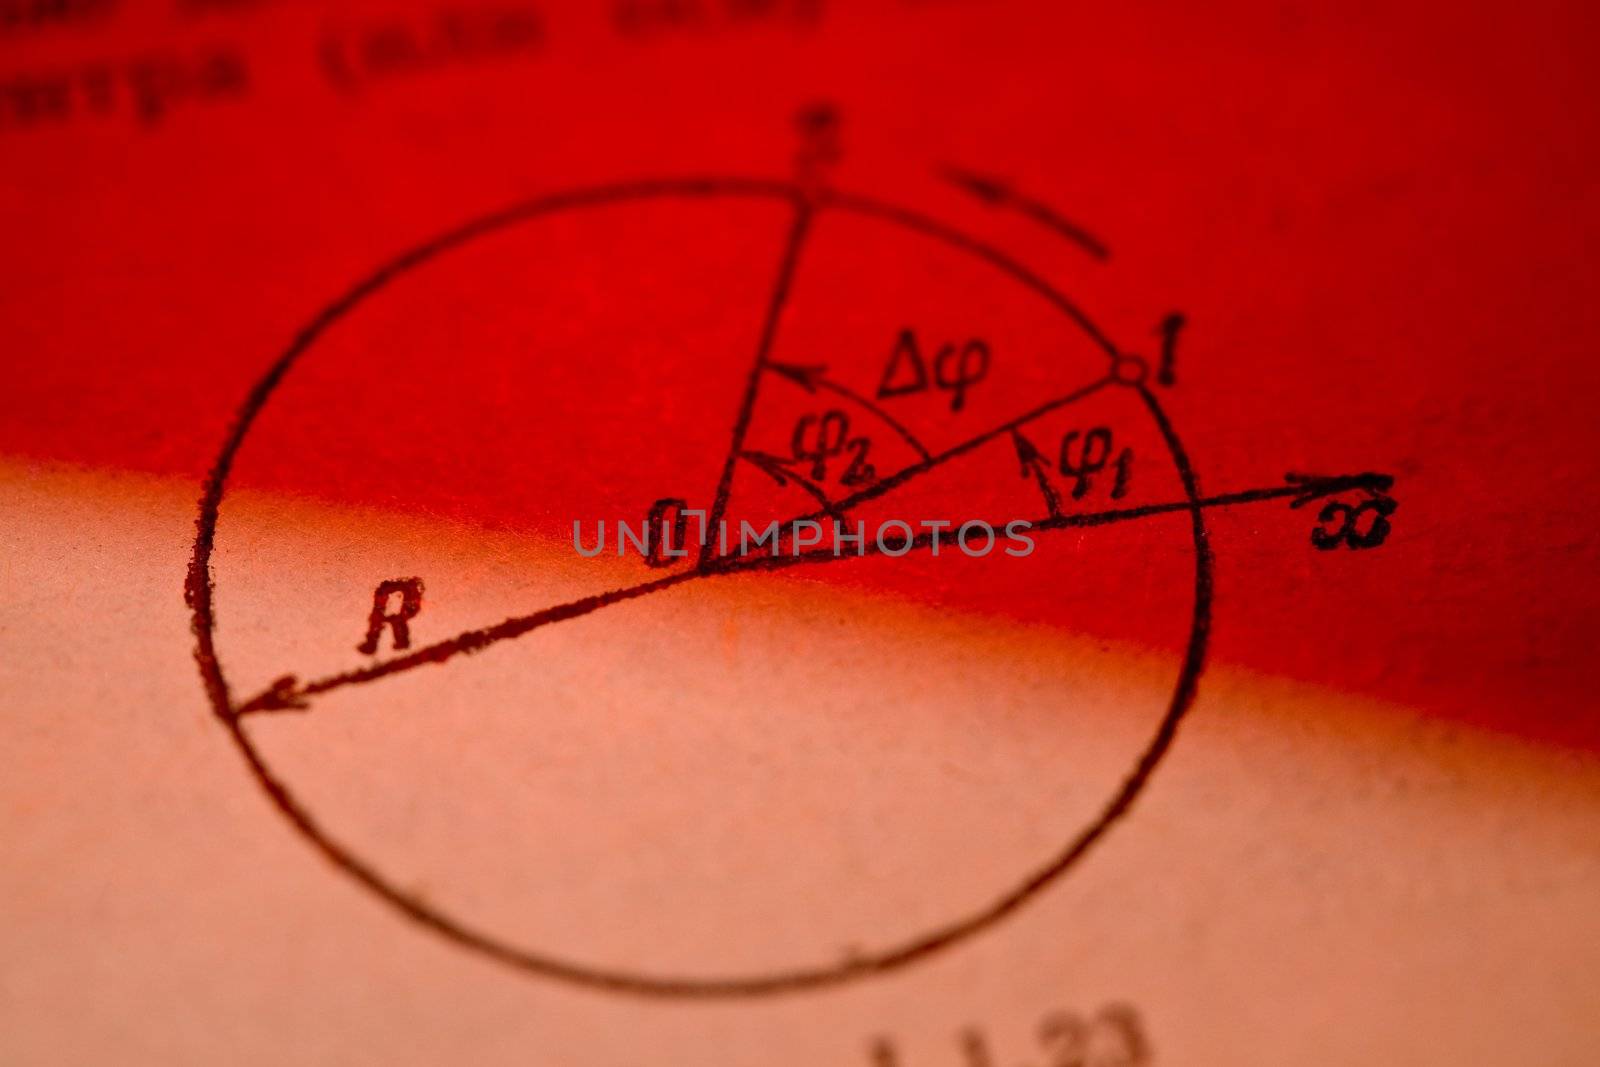 study series: trigonometry circle with angles on the red background